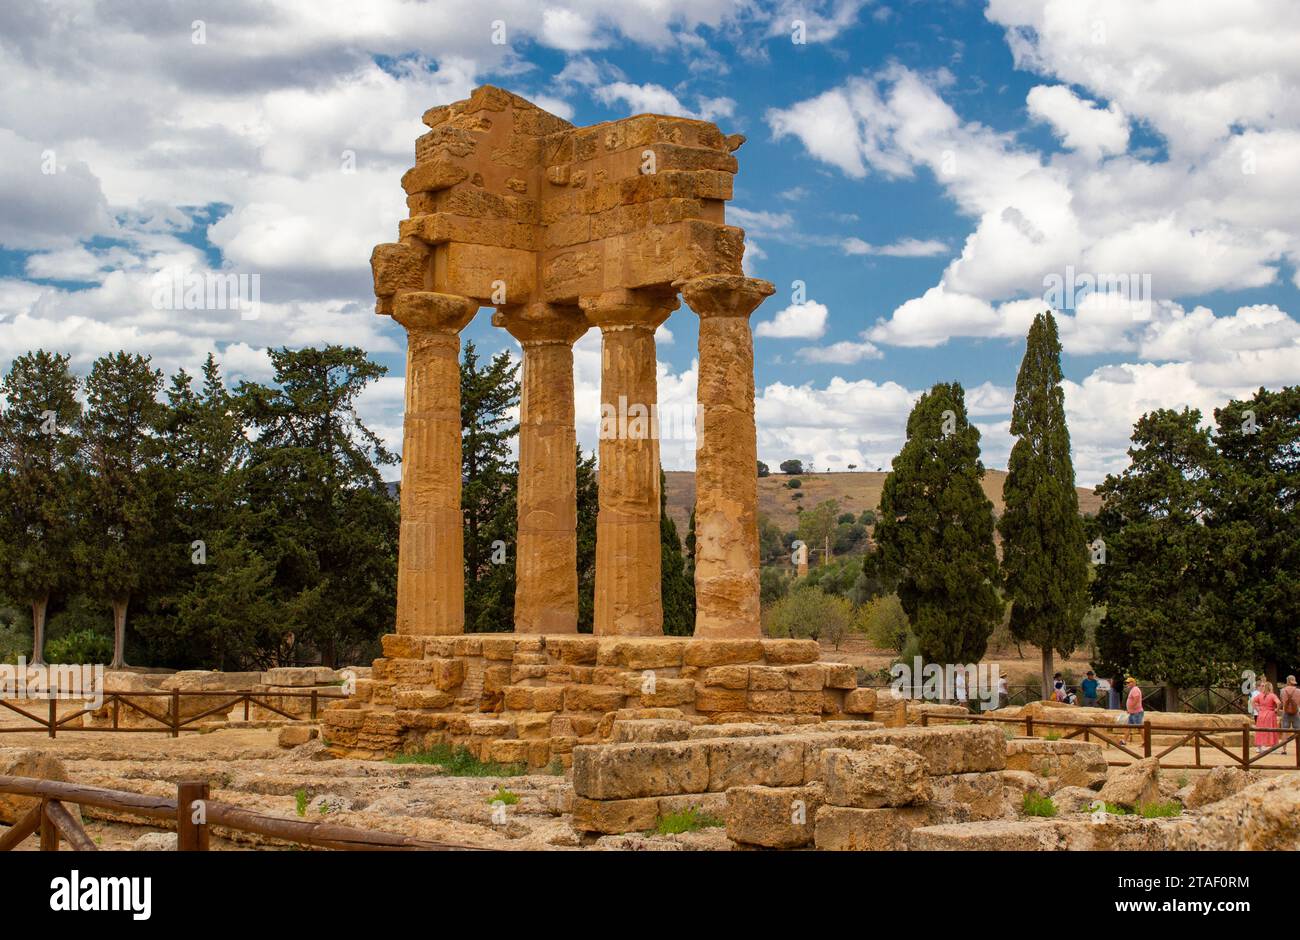 Dioscuri Temple. Daytime images of the Valley of the Temples in Agrigento, Sicily. Sunny day with clouds at noon. Greek archeological architecture Stock Photo